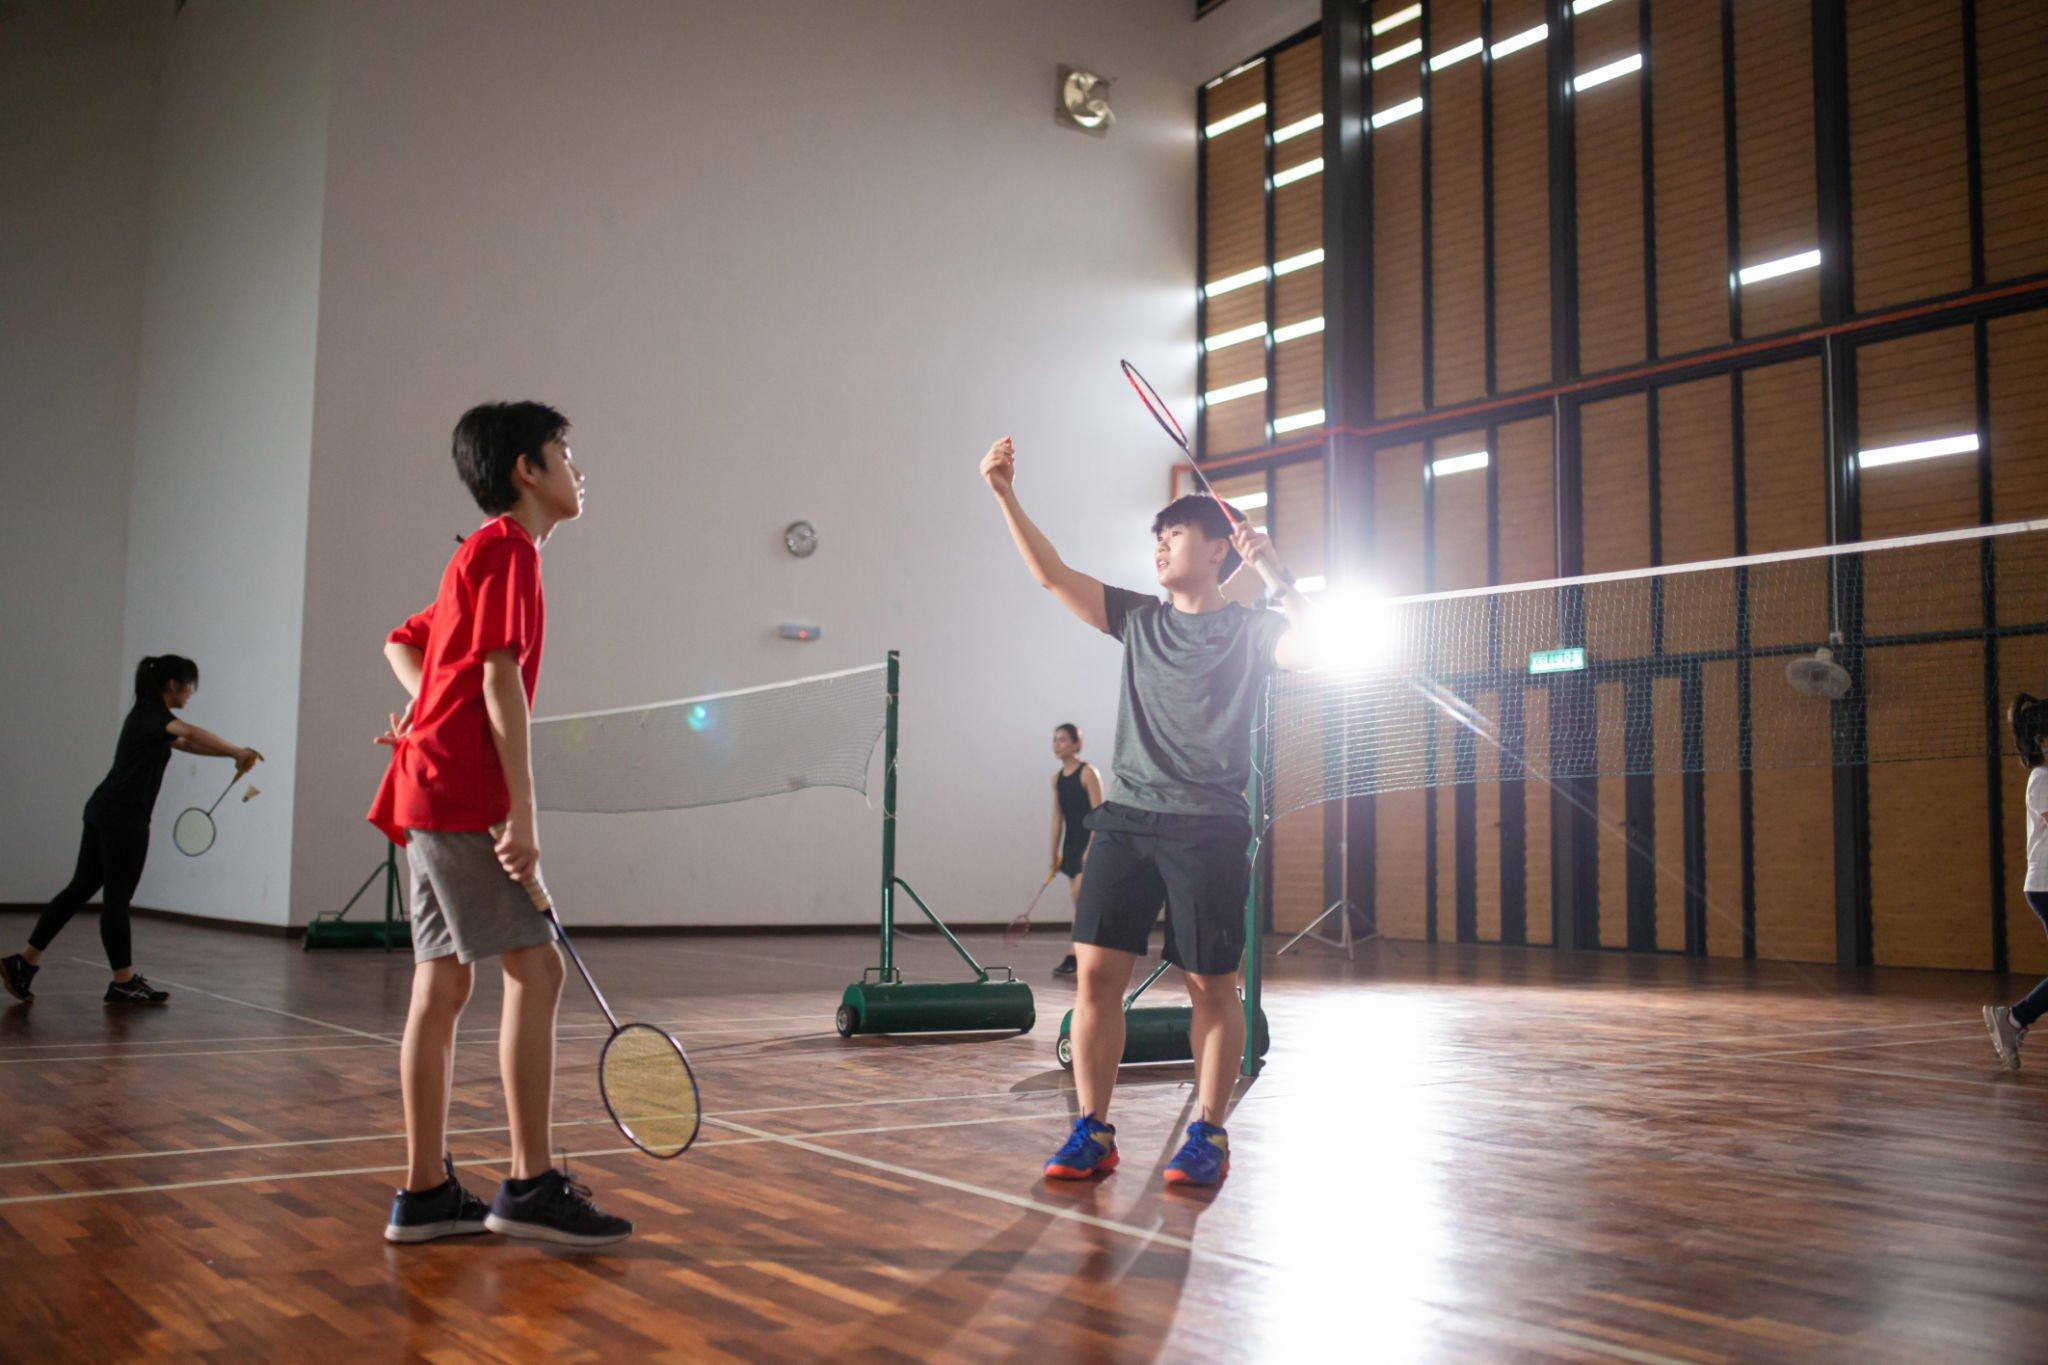 When choosing a badminton training in Dubai, it's important to consider factors such as the coach's experience and qualifications, the program's schedule and location, and the cost. With the right training and practice, you can improve your skills and achieve your goals in badminton.